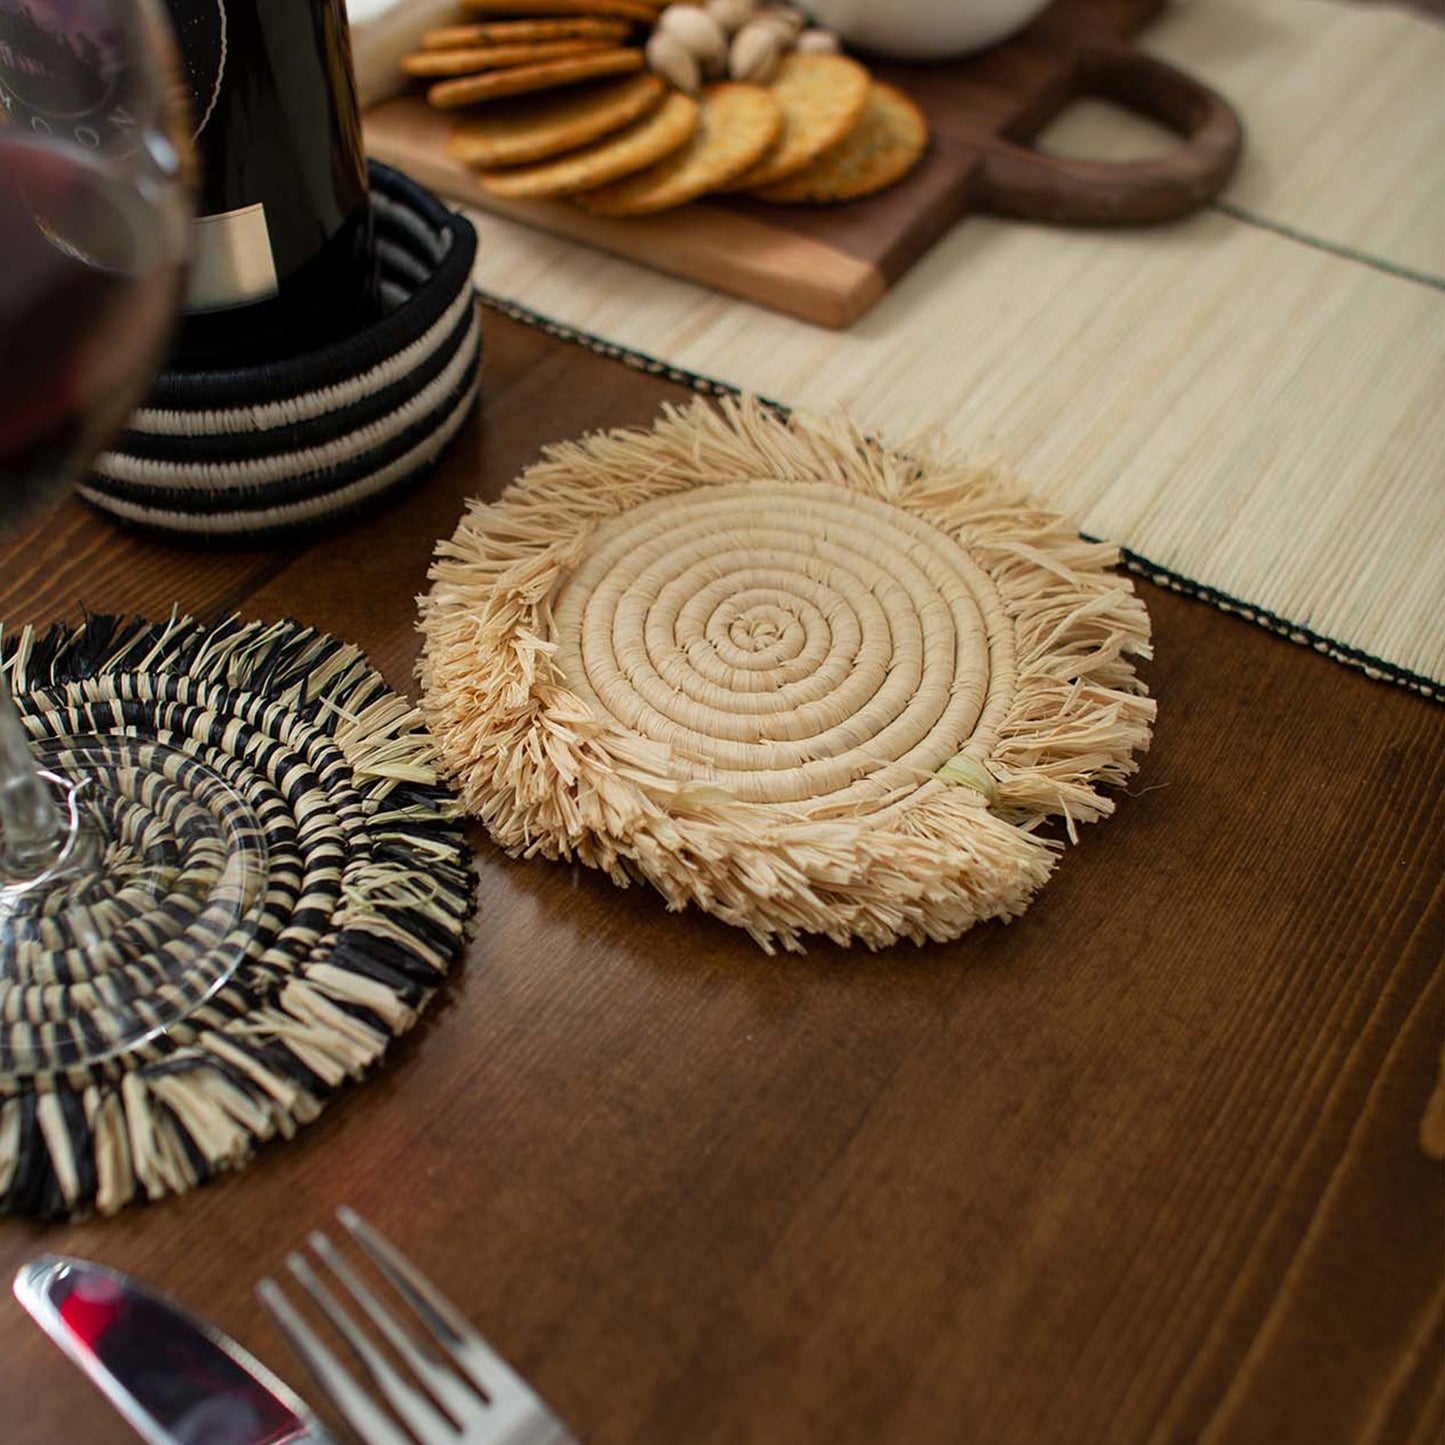 Neutral Fringed Coasters - Natural, Set of 4 | Home Decor